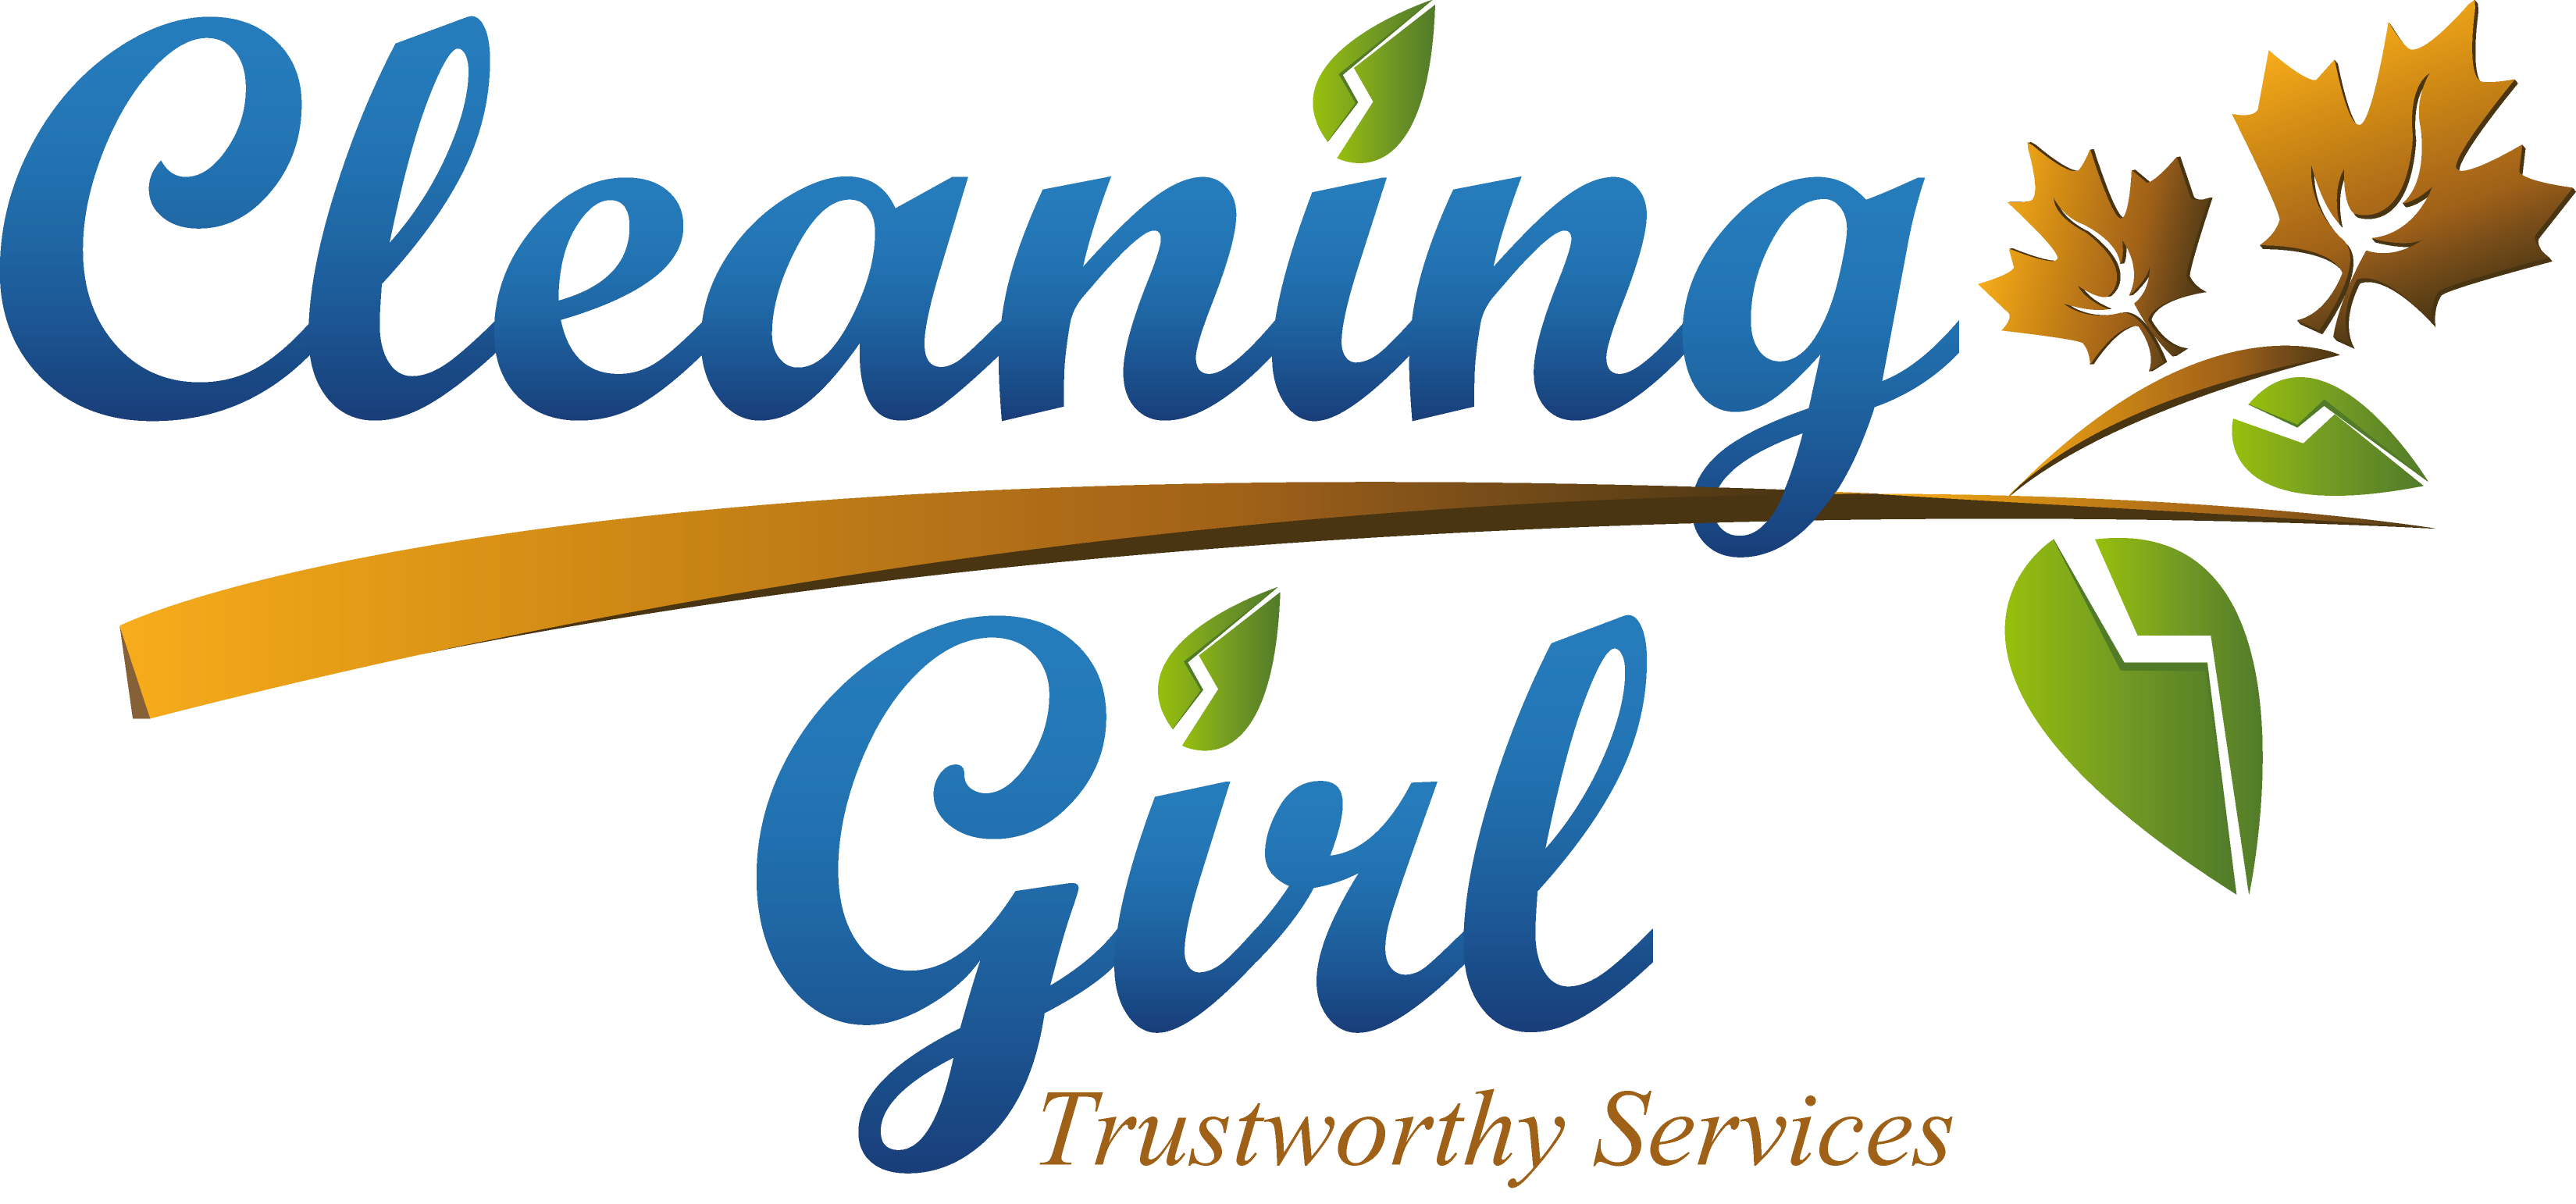 January MMS: Cleaning Girl Trustworthy Services